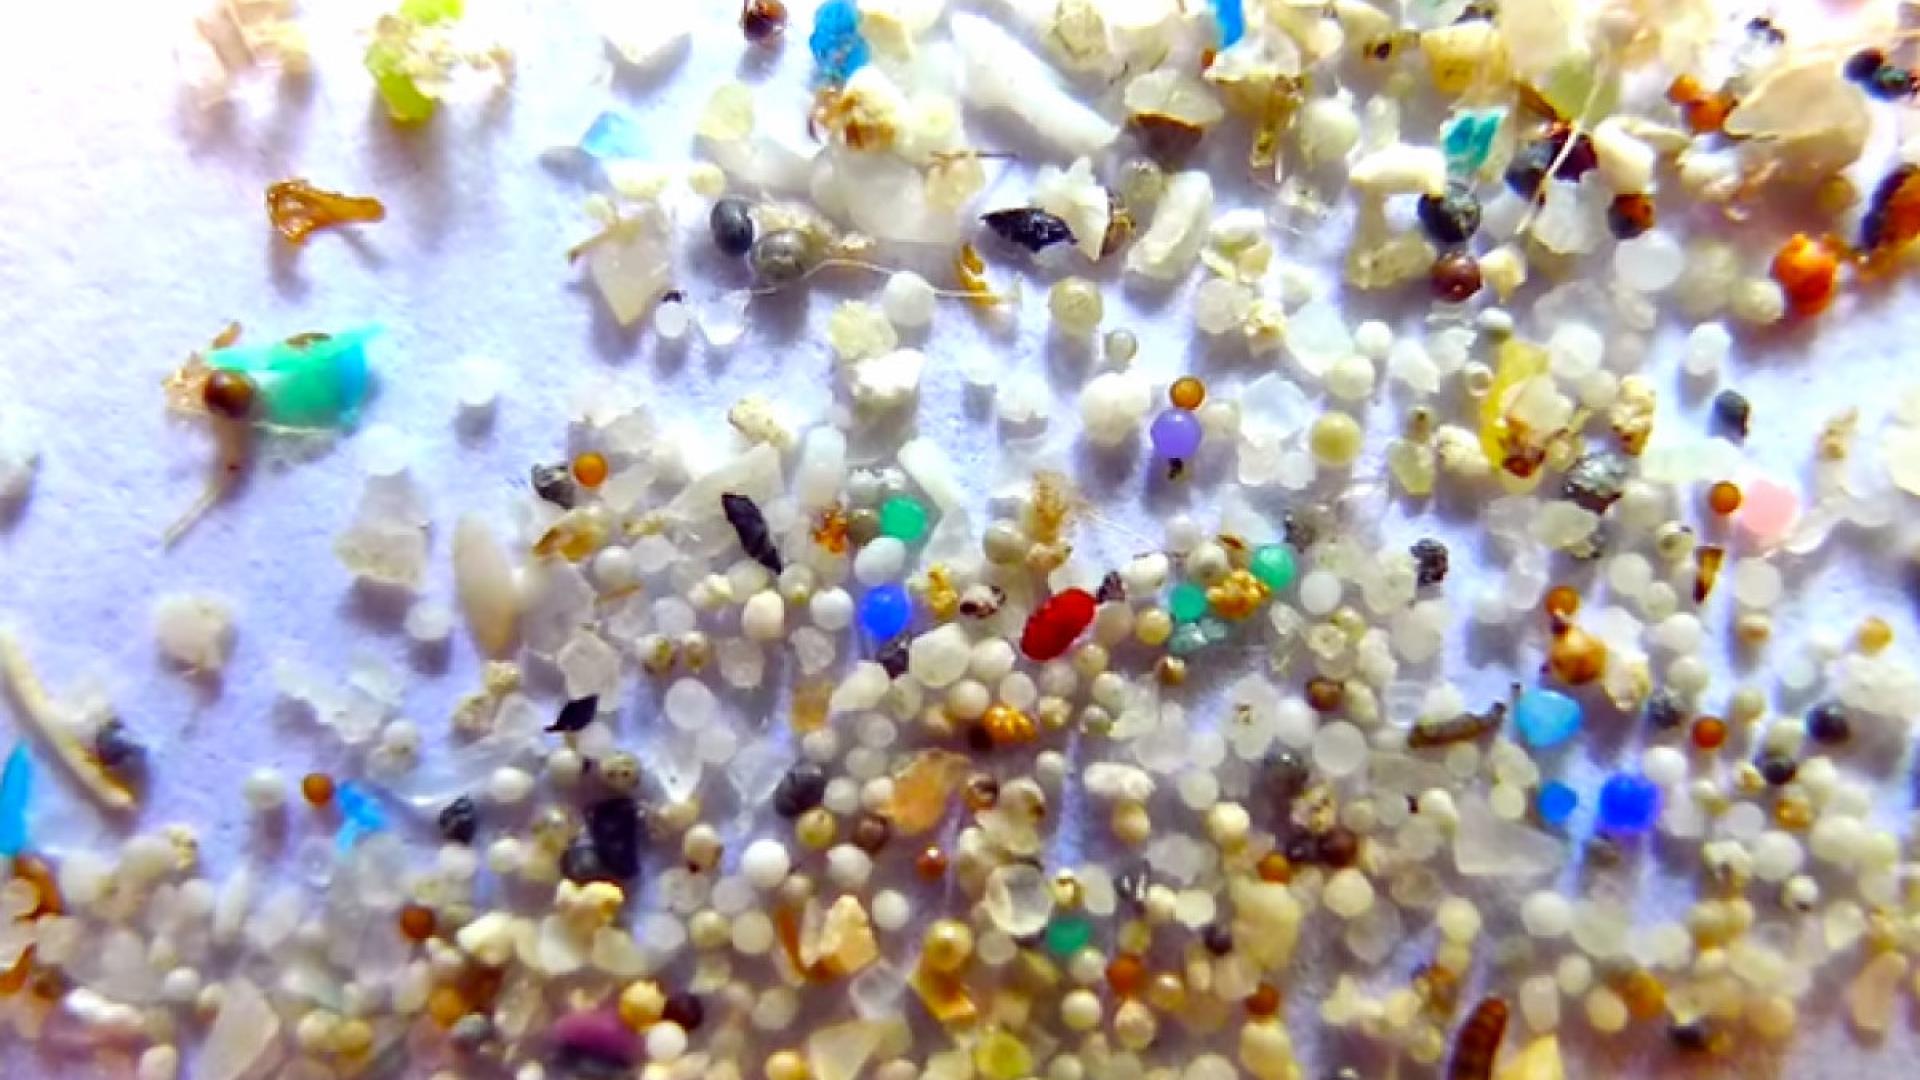 Water Matters - A detailed shot of plastic microbeads